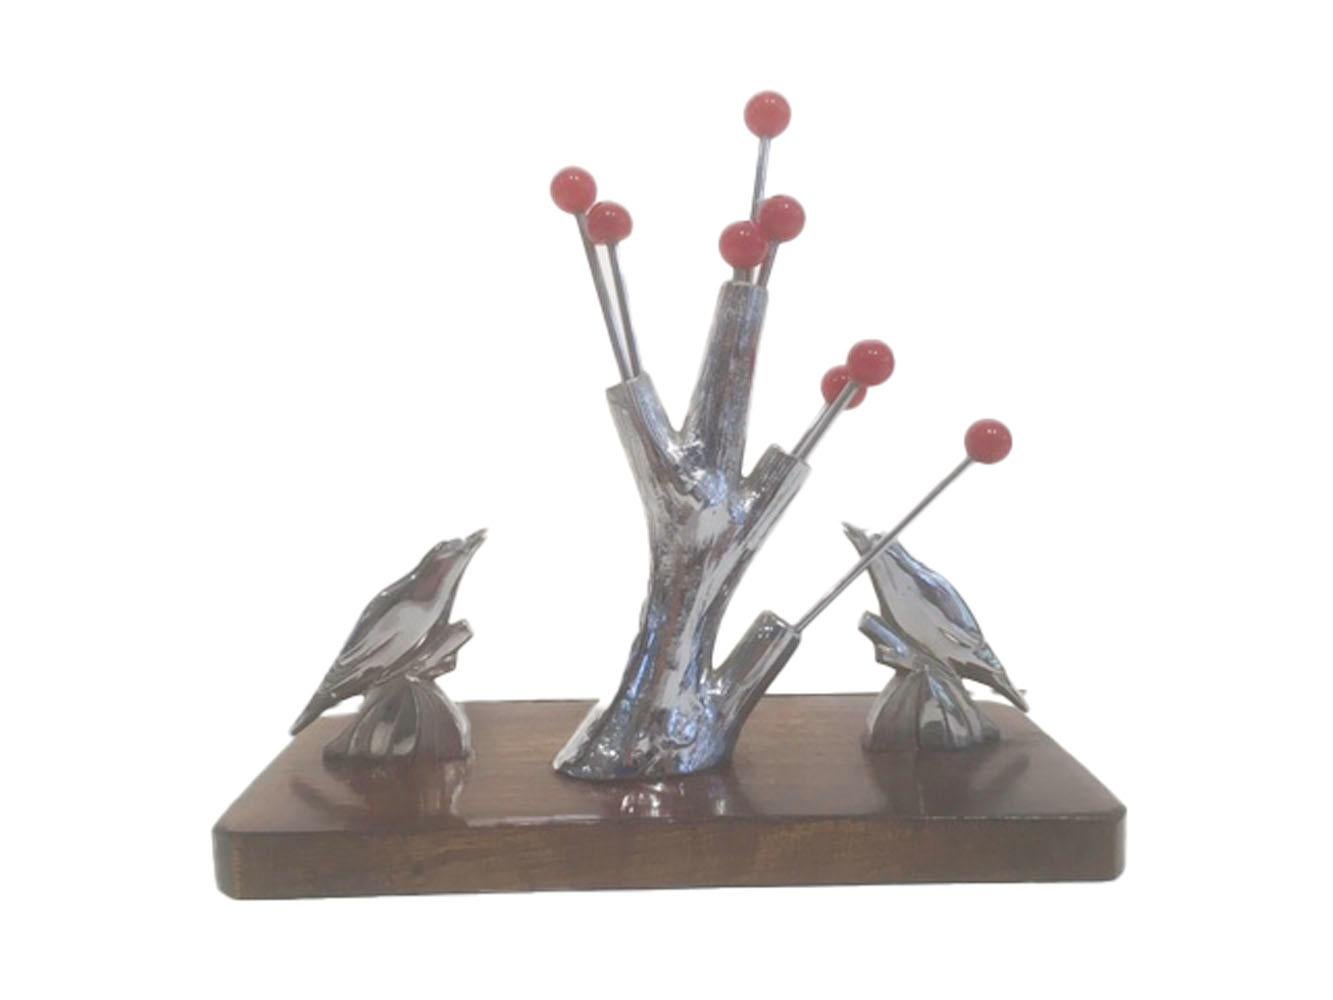 Eight red ball-topped chrome cocktail picks in a tree trunk stand where the pick-tops appear to be berries - two birds are at the base of the tree looking up at the berries. The chrome tree and birds are attached to a wooden base.